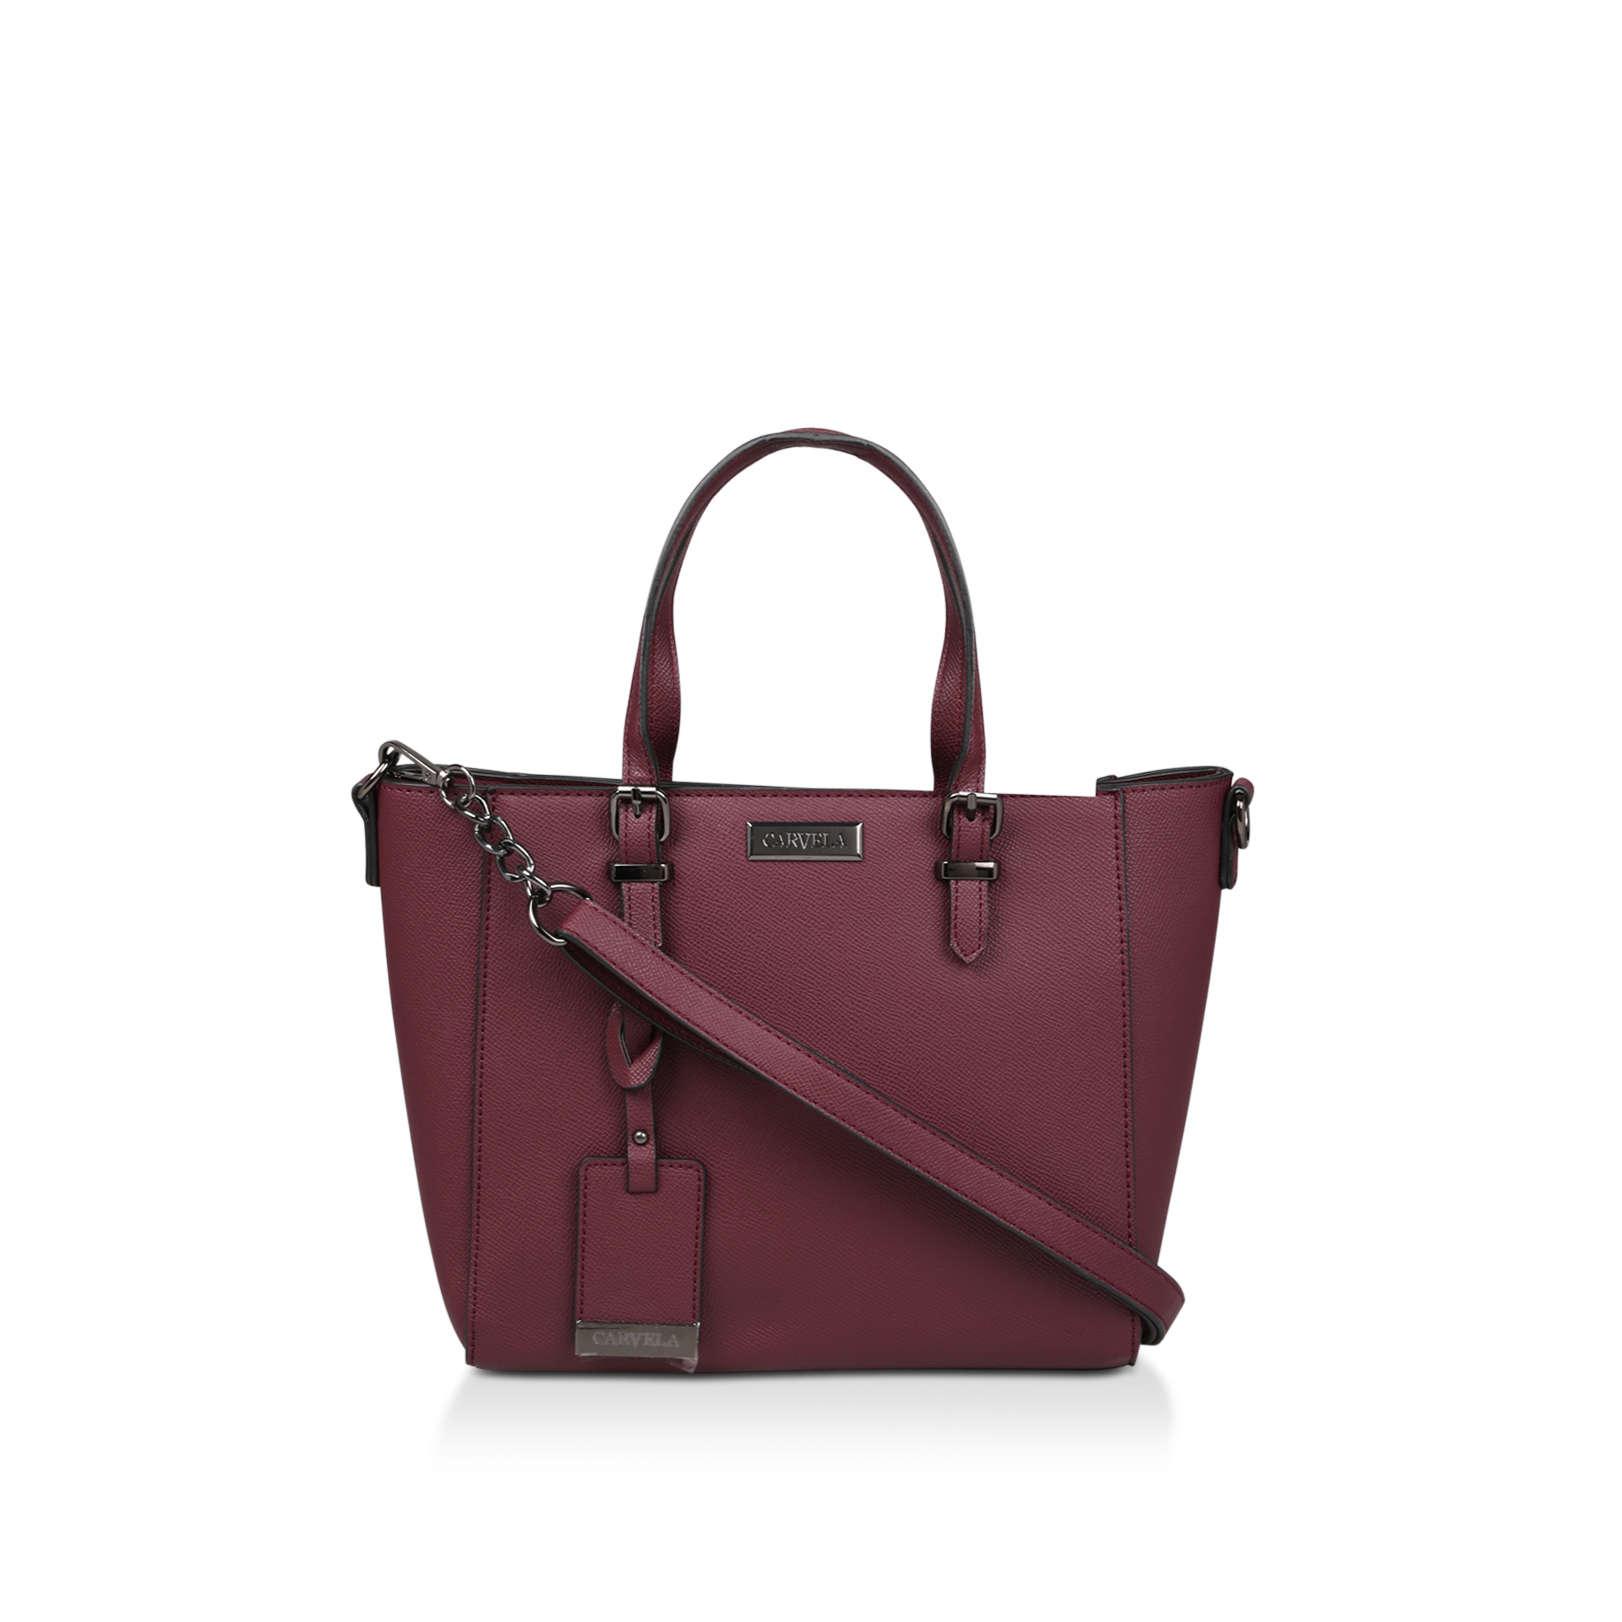 Carvela Kurt Geiger Synthetic Wine Tote Bag in Red - Lyst